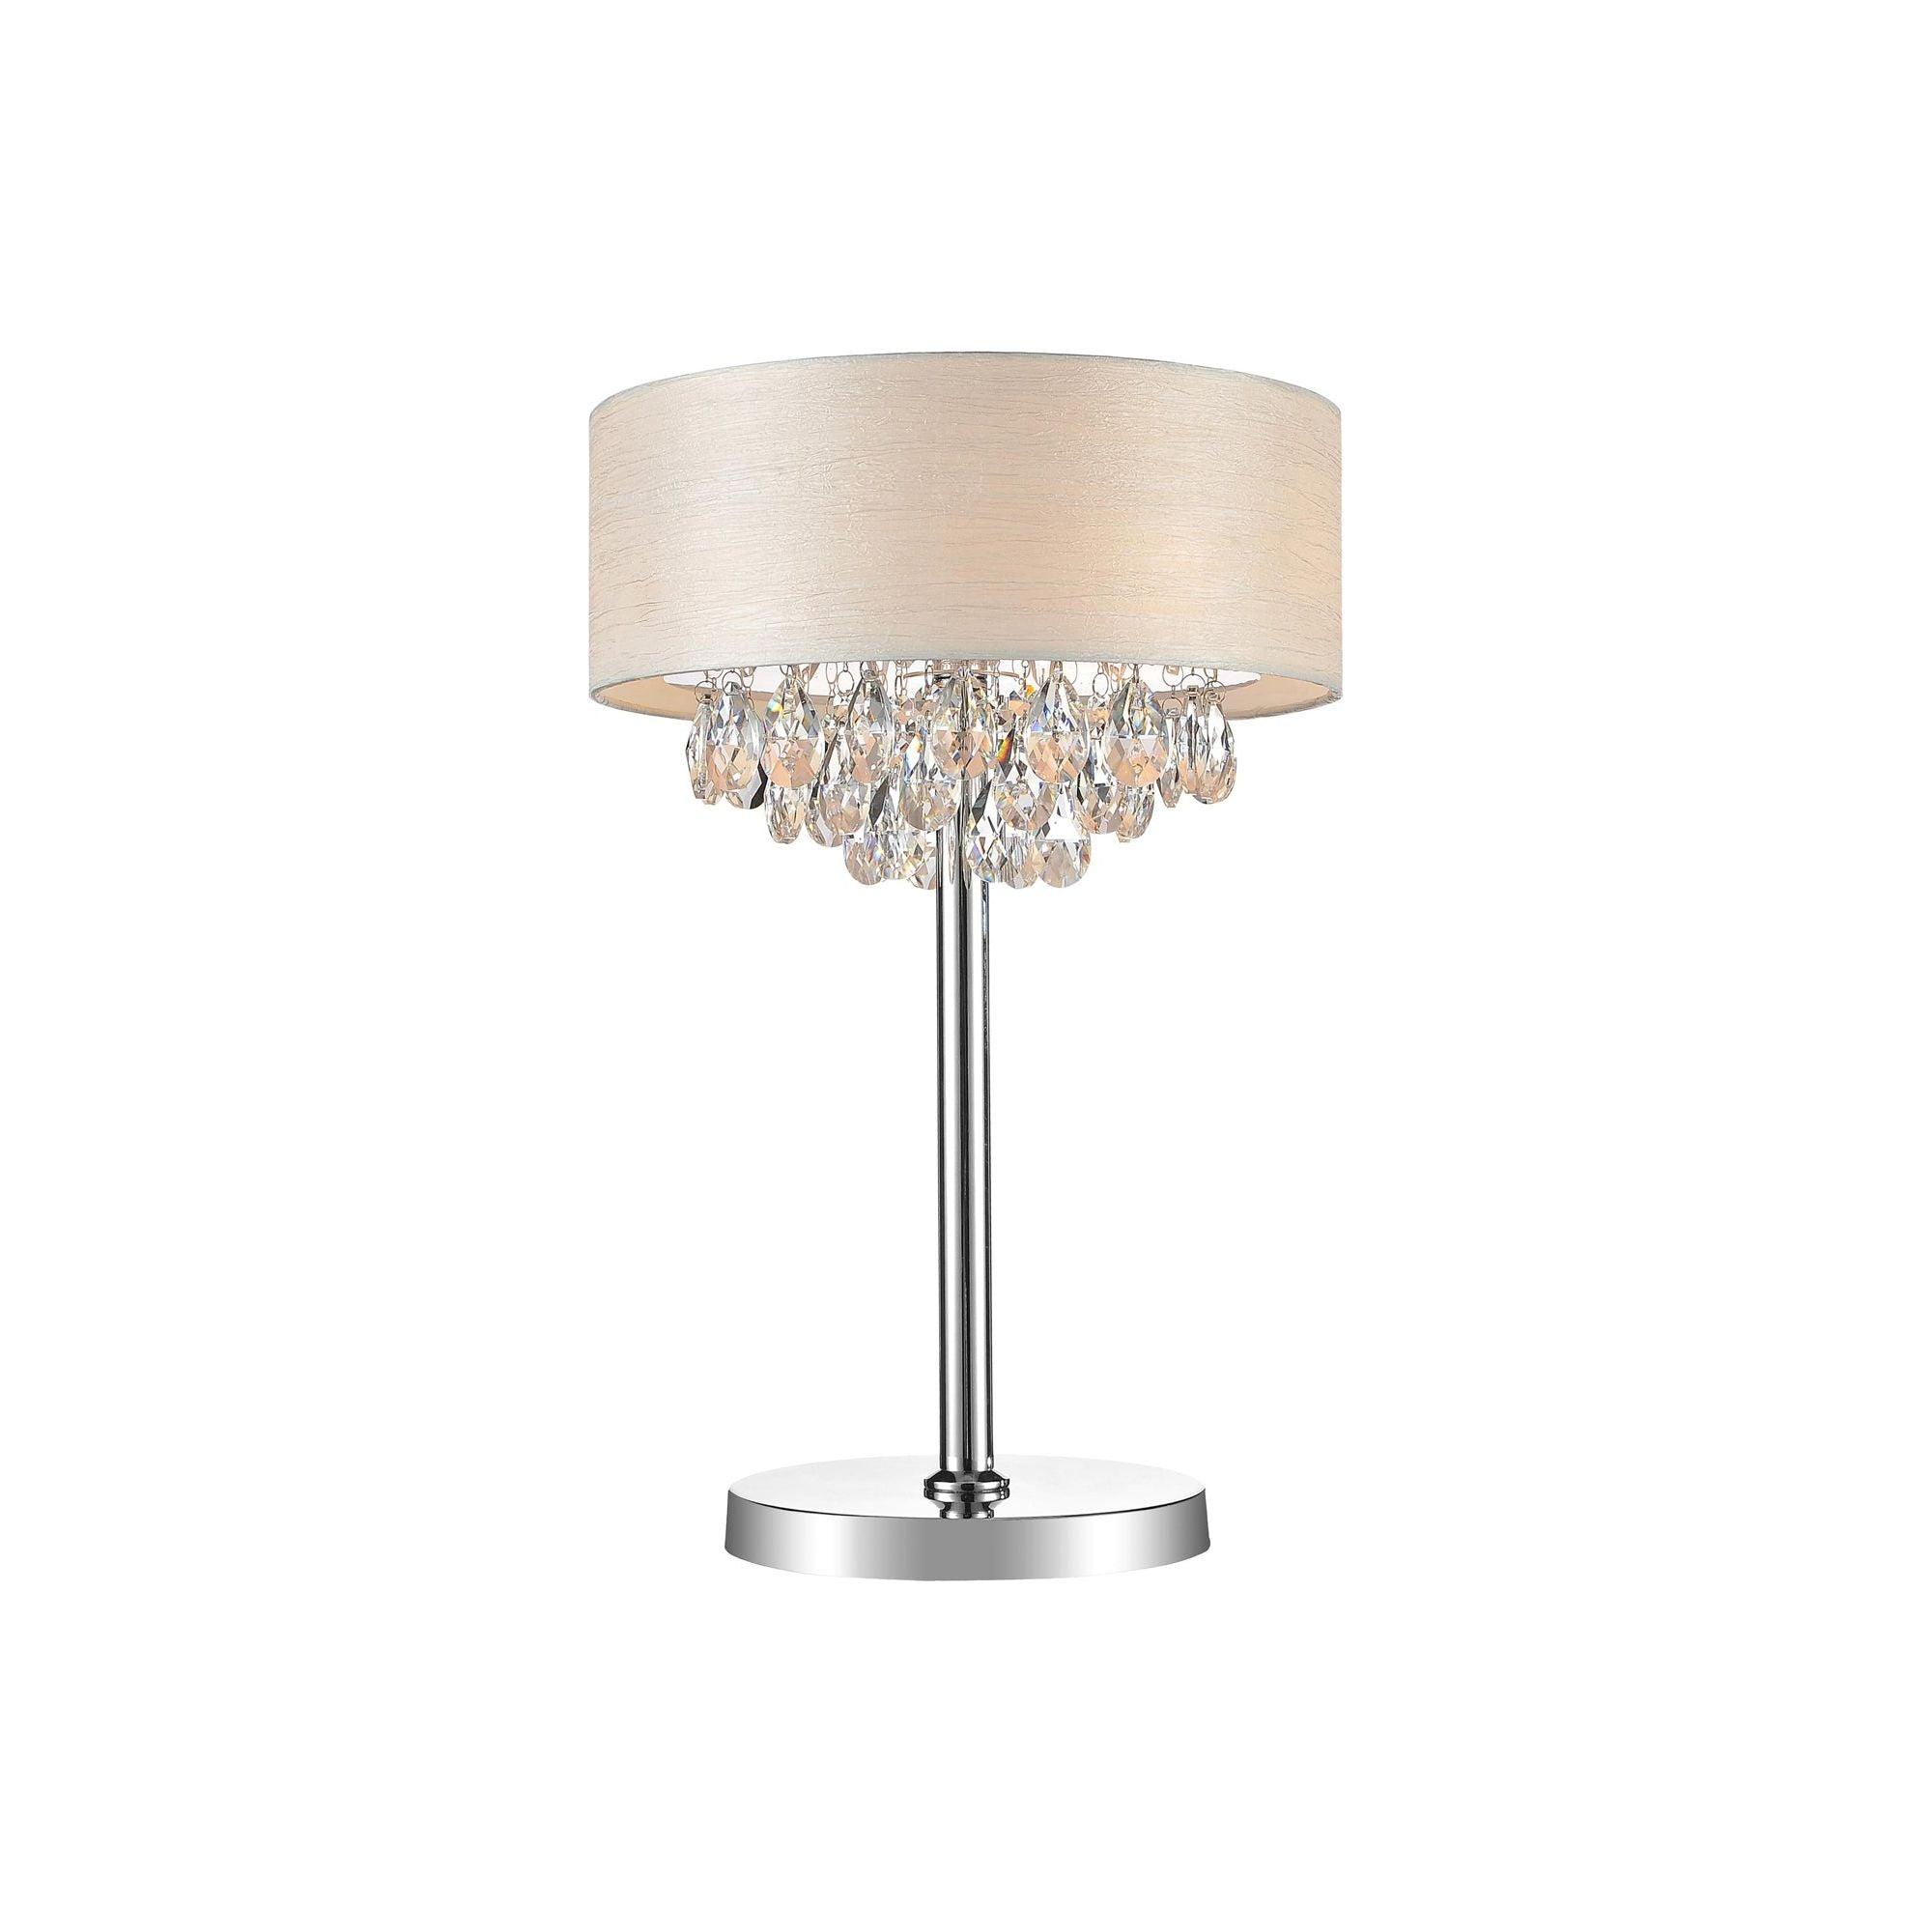 CWI - Dash Table Lamp - Lights Canada